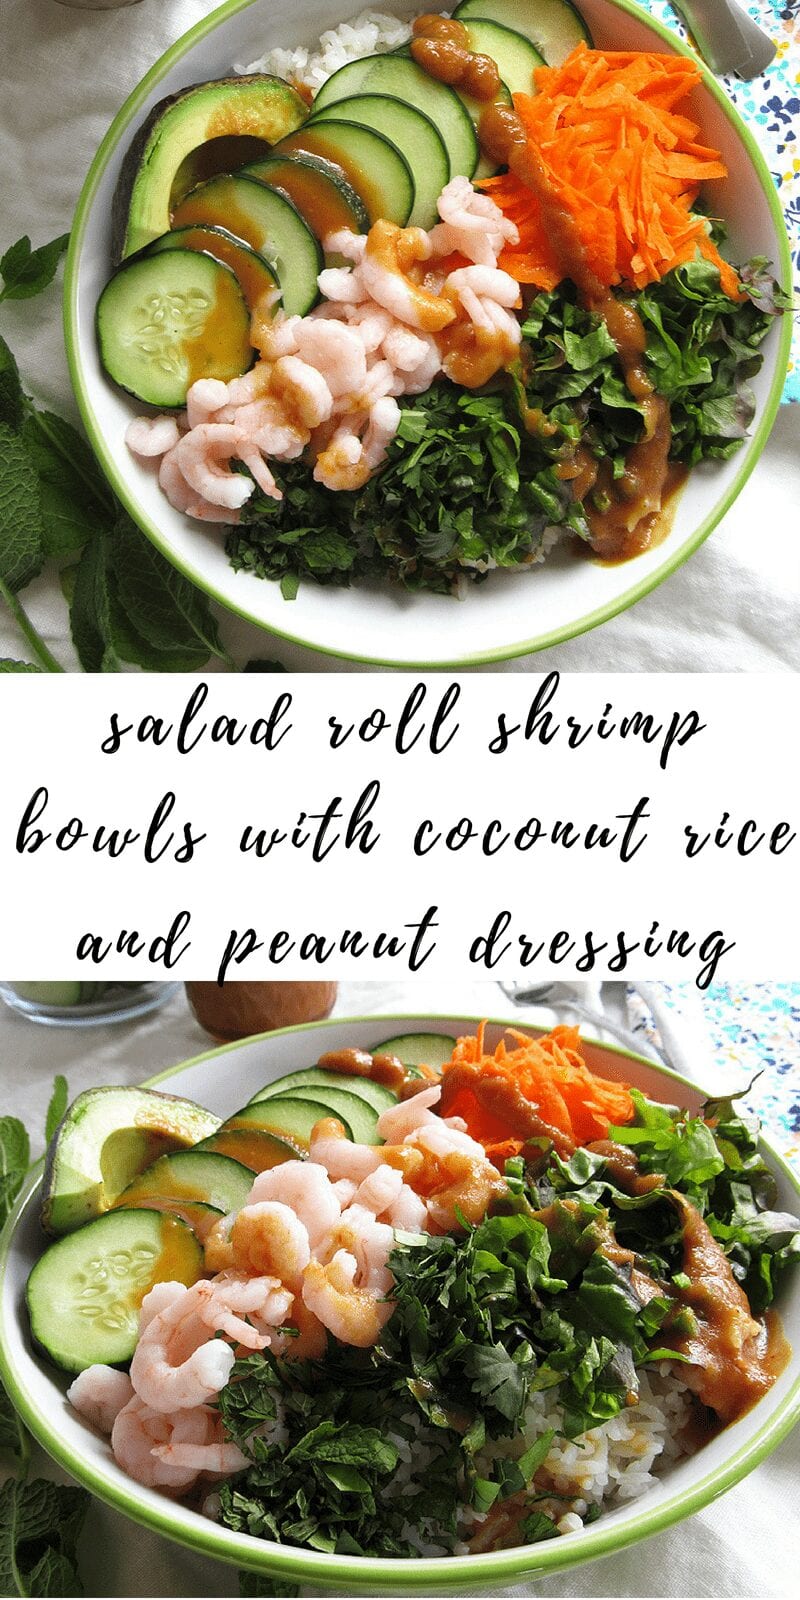 salad roll shrimp bowls with coconut rice and peanut dressing